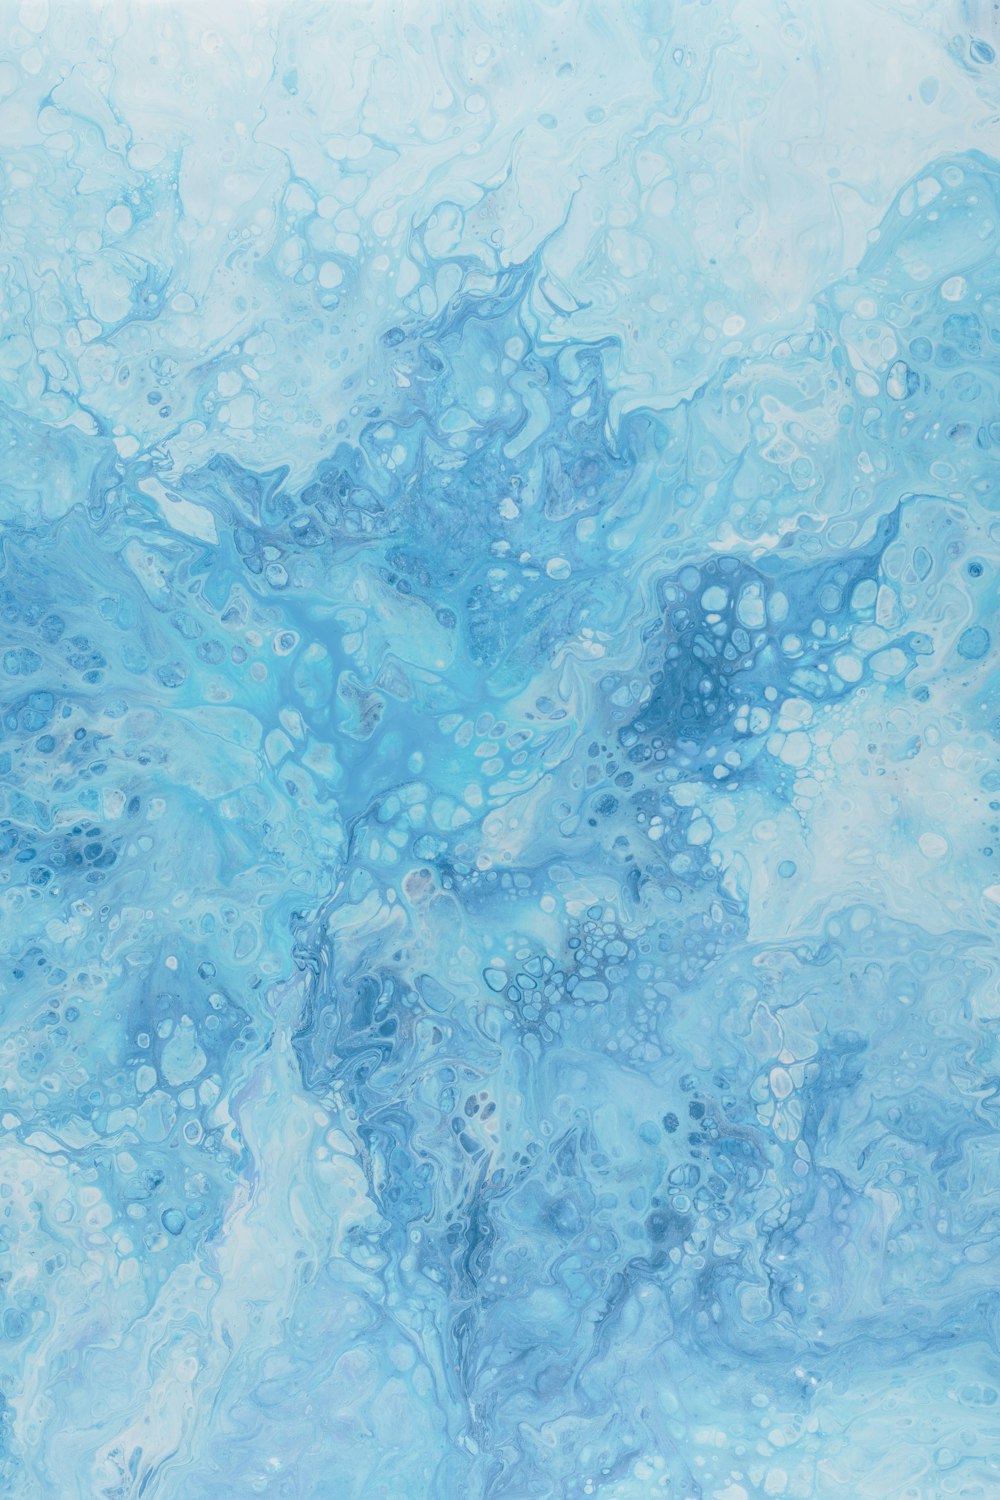 an abstract painting of blue and white colors